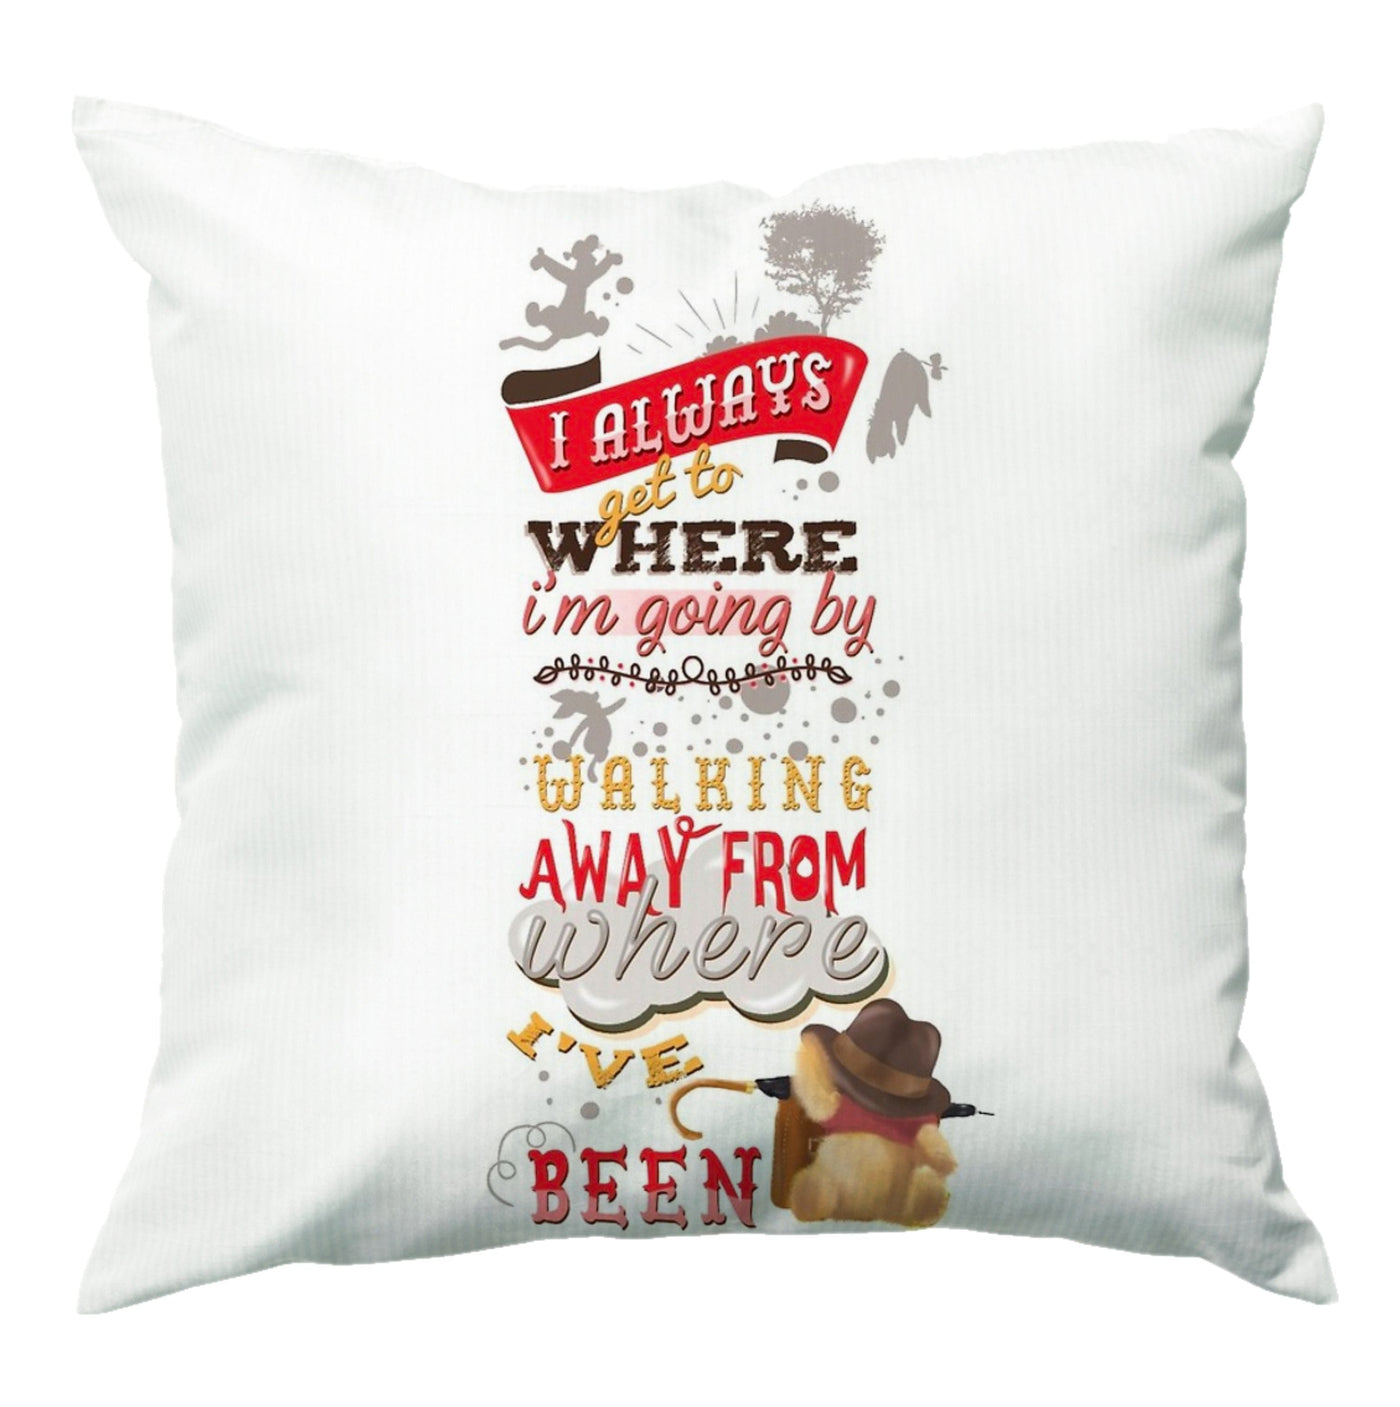 I Always Get Where I'm Going - Winnie The Pooh Quote Cushion